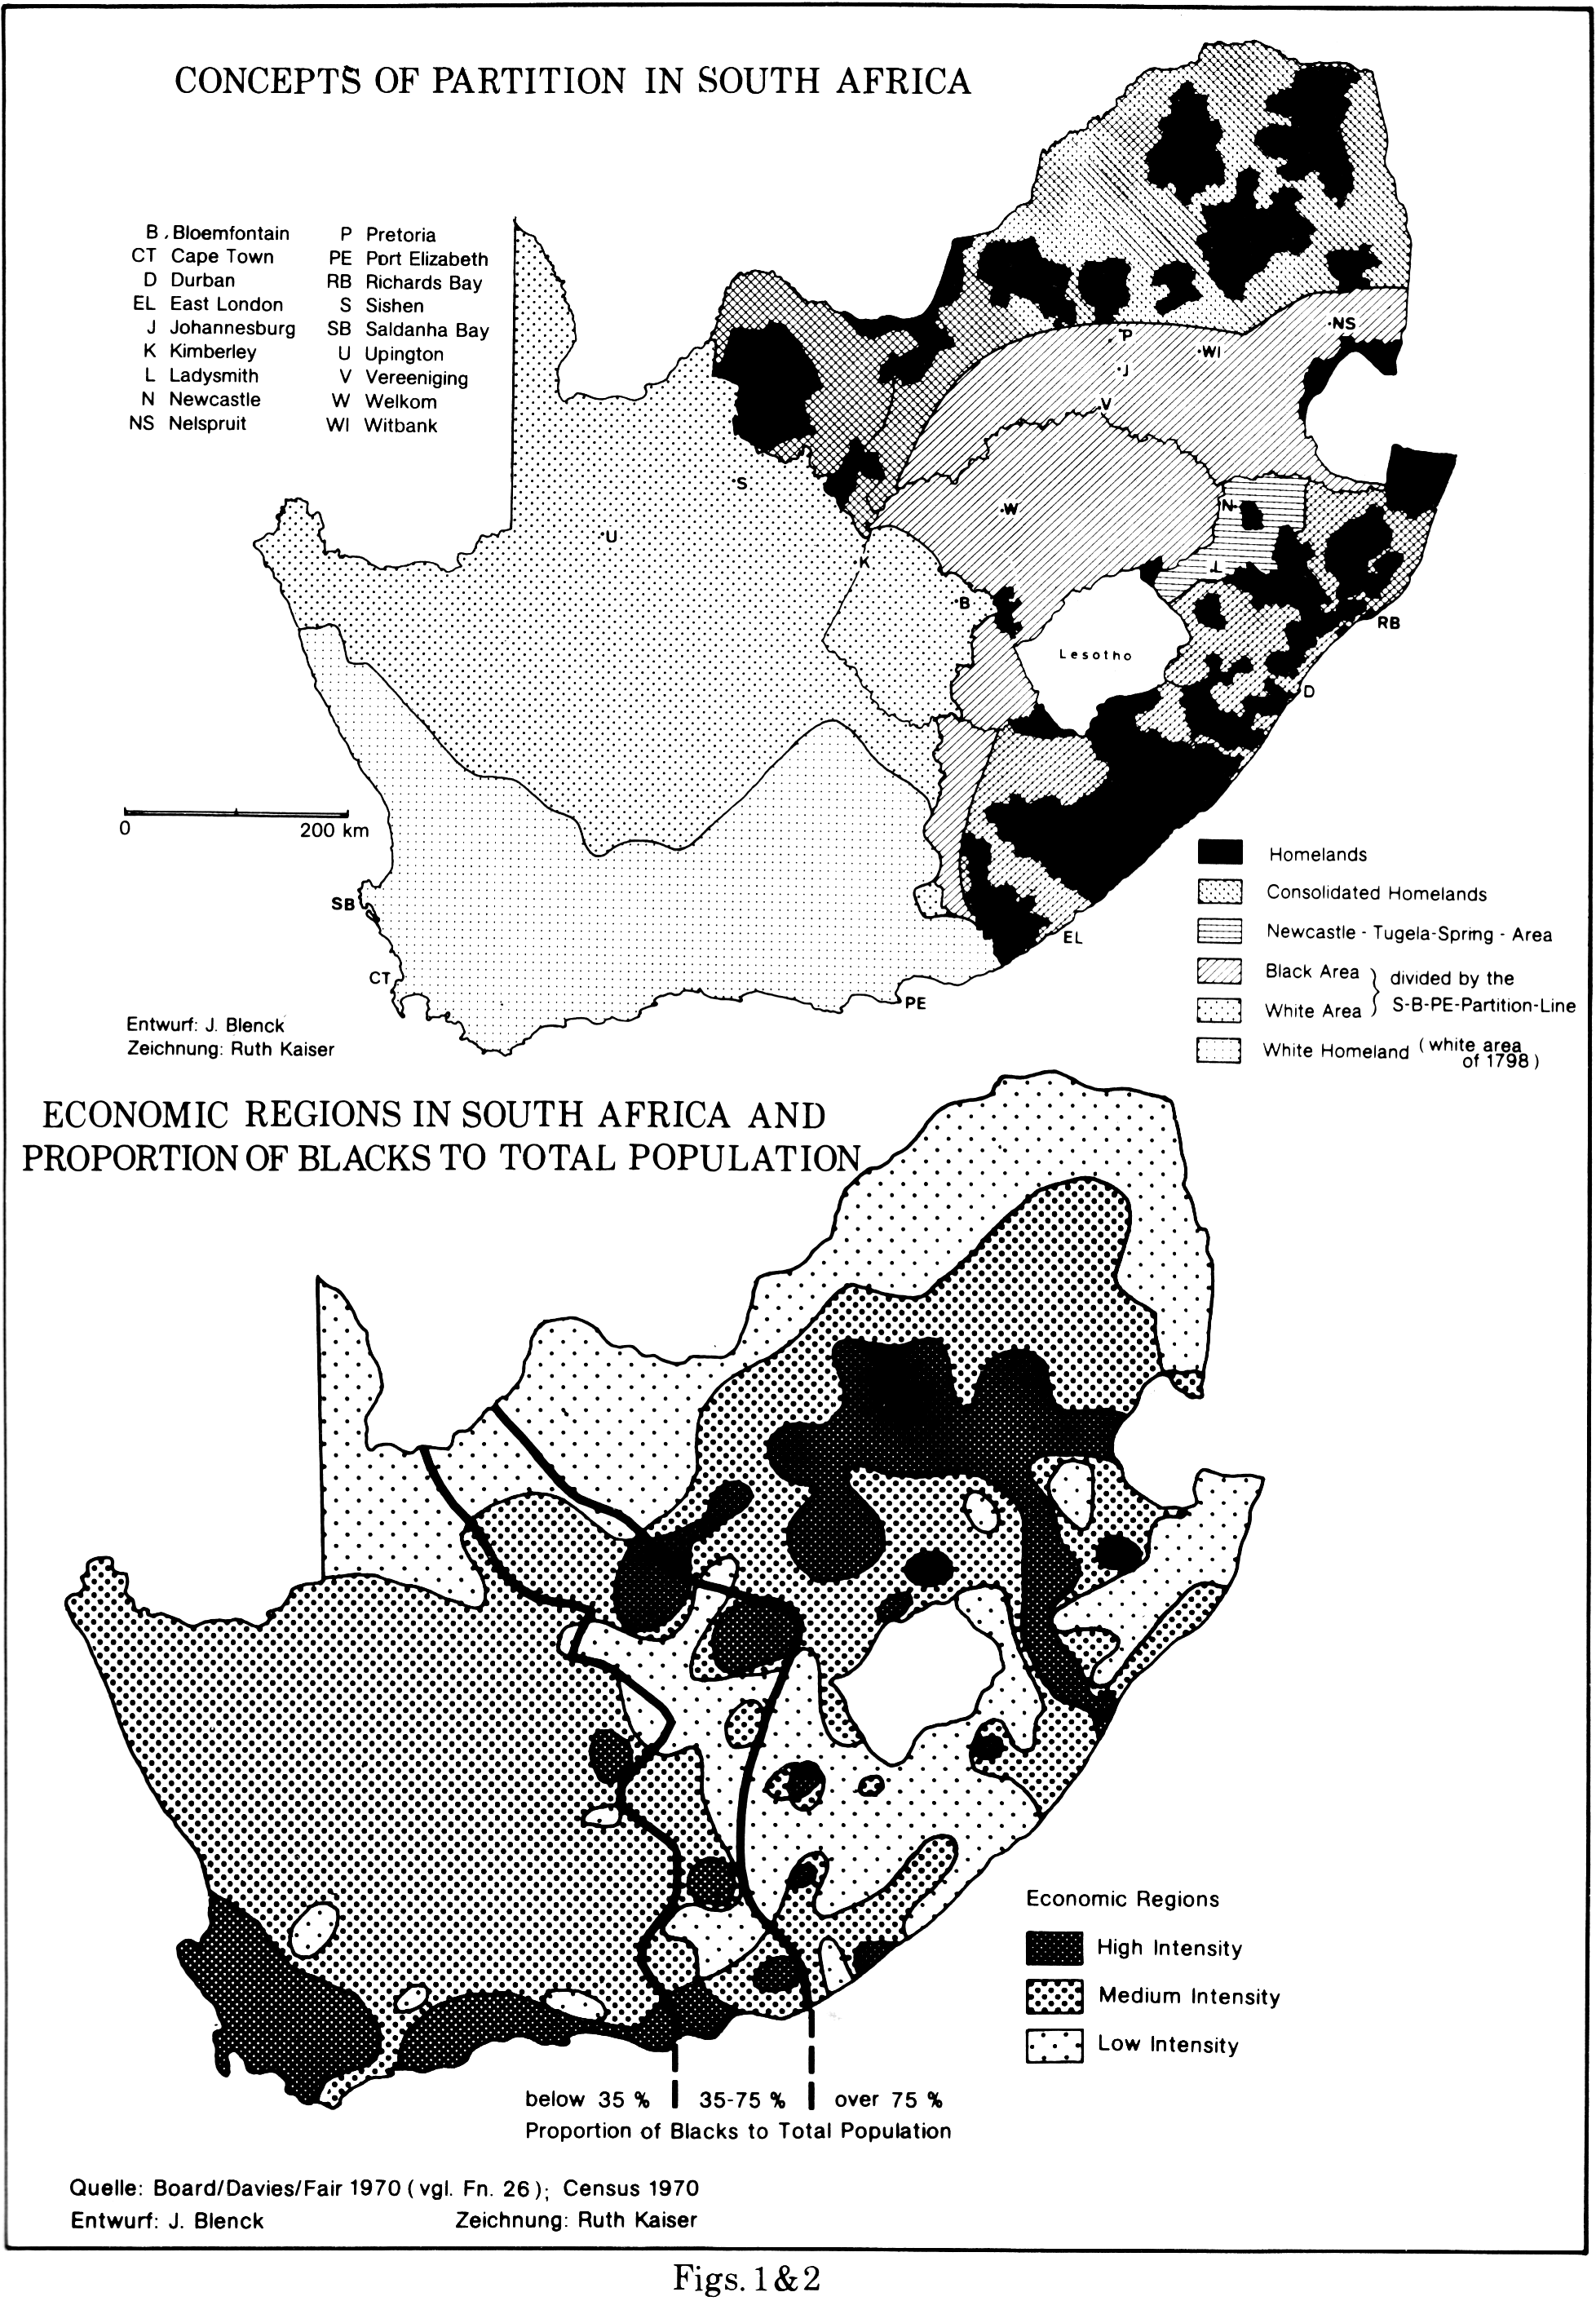 Figs. 1&2: Concepts of Partition in South Africa, Economic regions in South Africa and proportion of blacks to total population